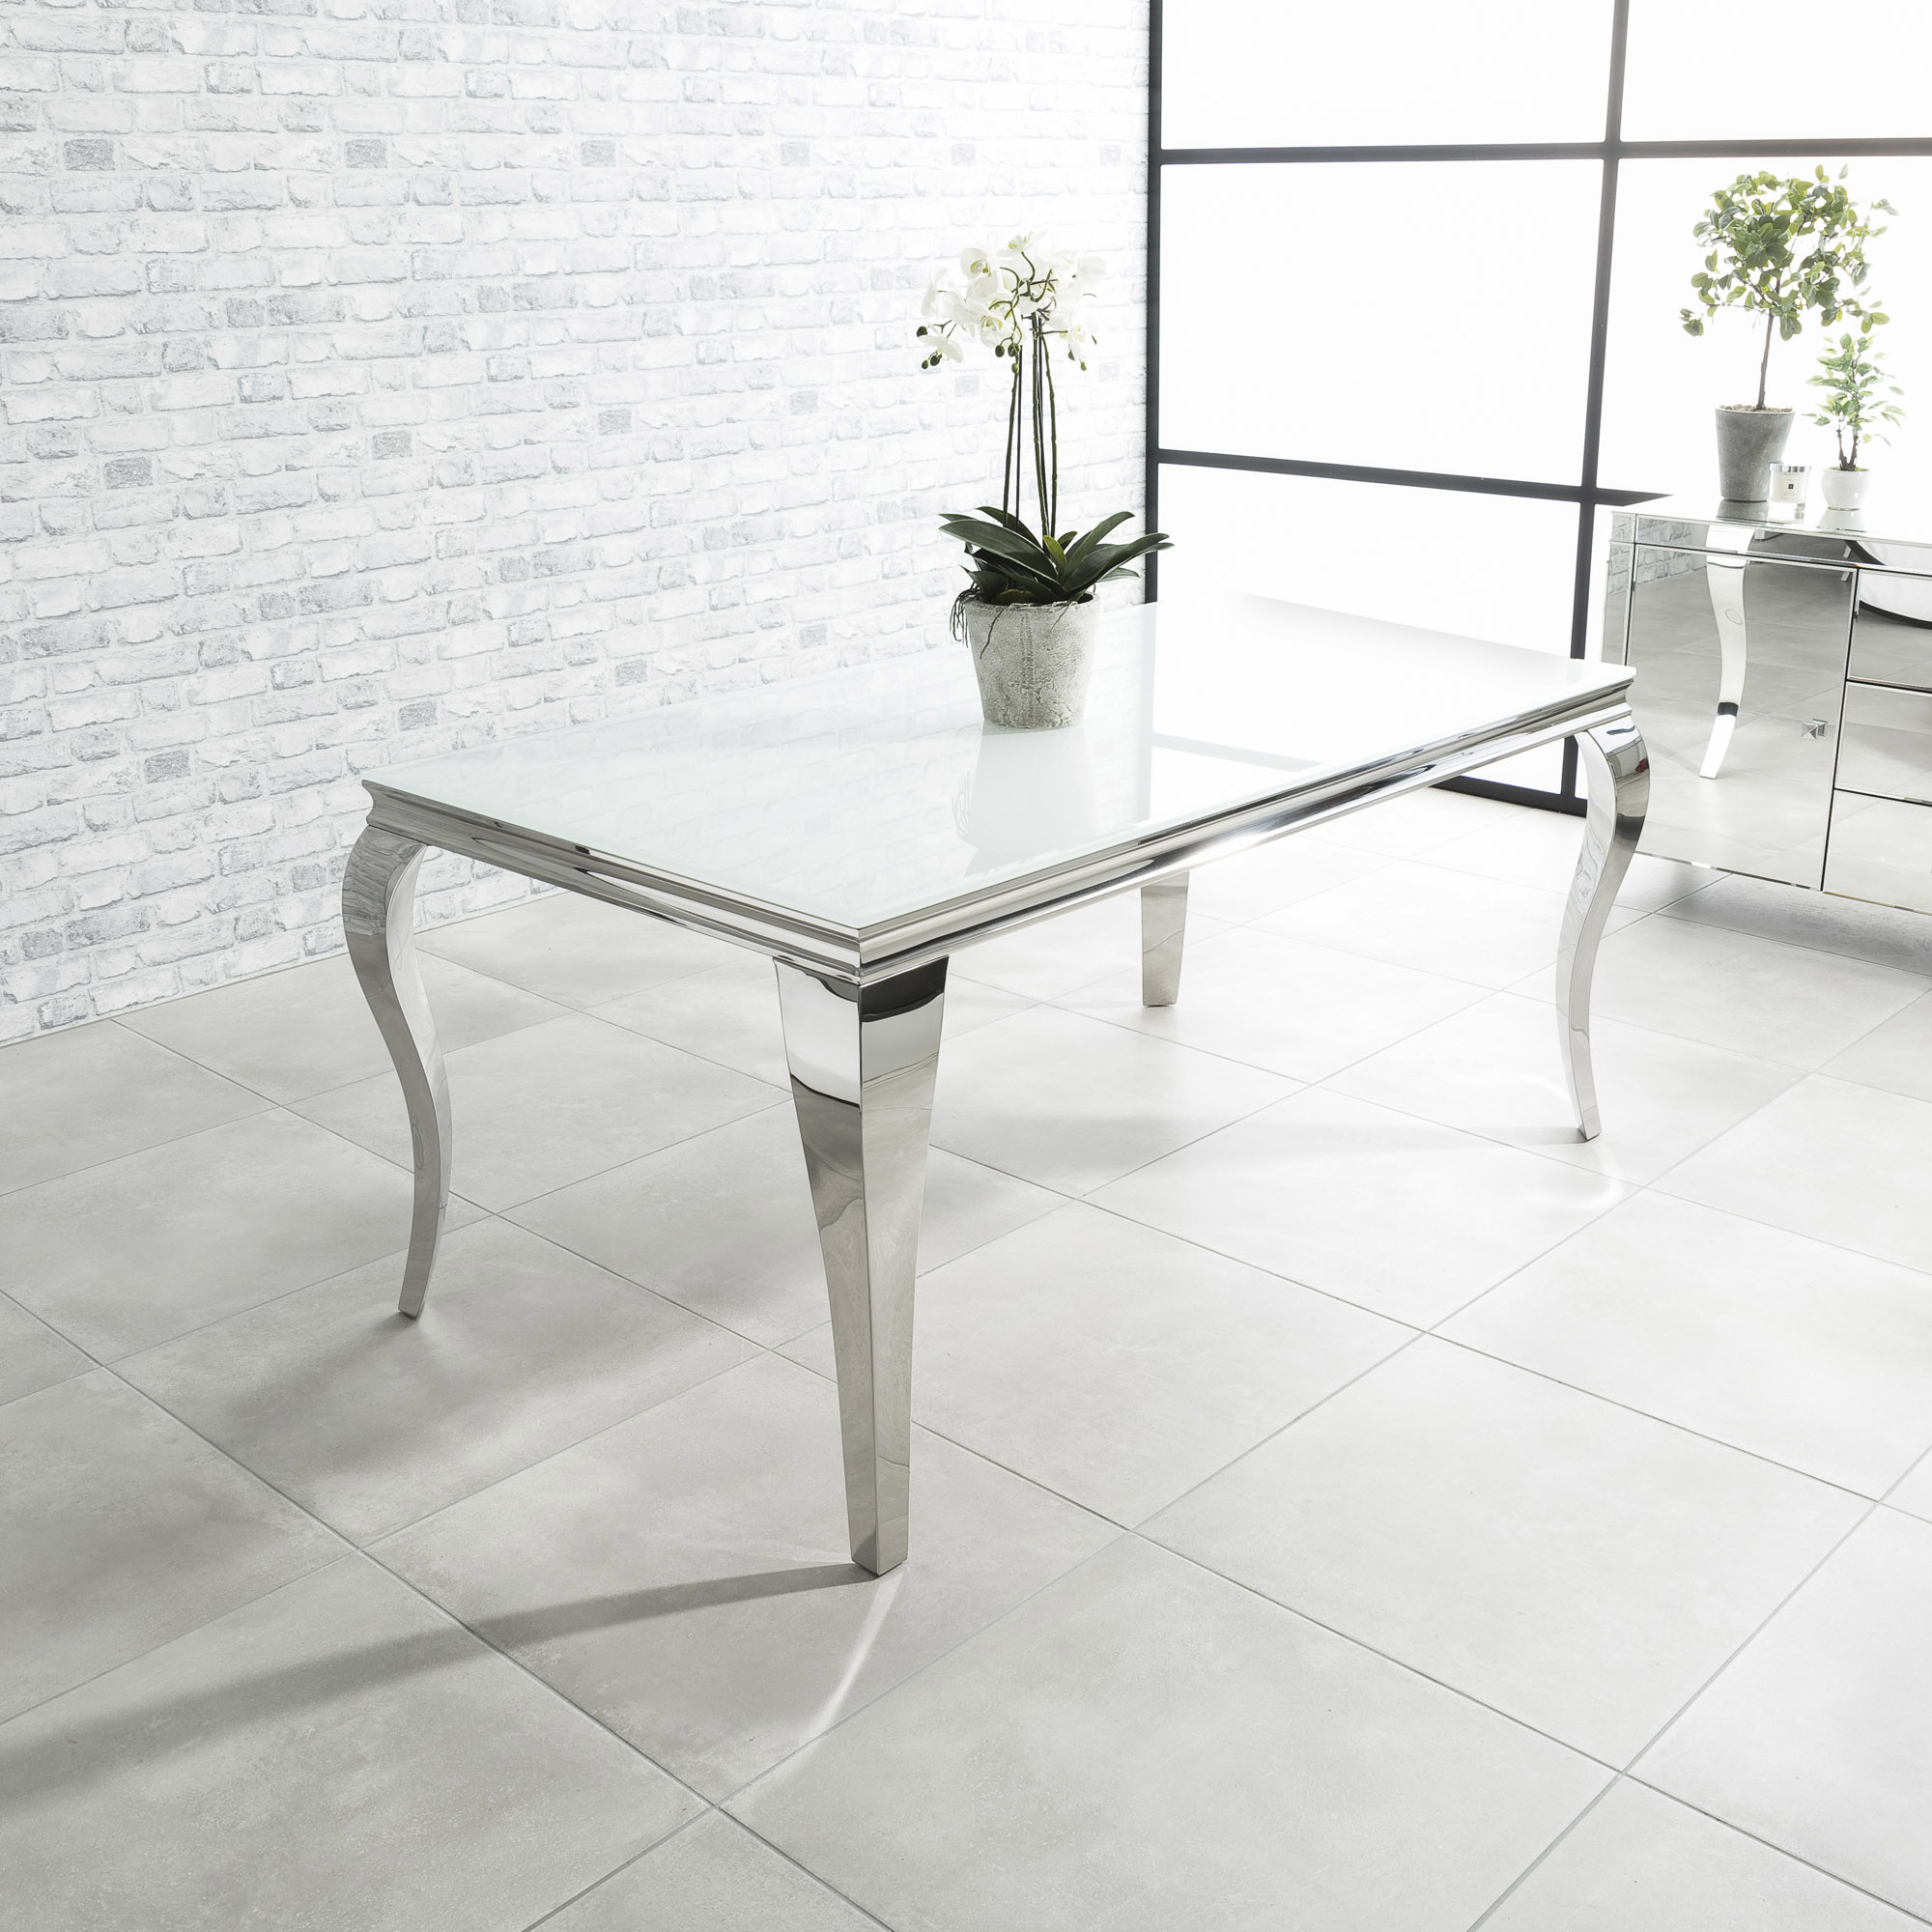 1.6m Louis Polished Steel Dining White Glass Table Set with 6 Grey Brushed Velvet Dining Chair